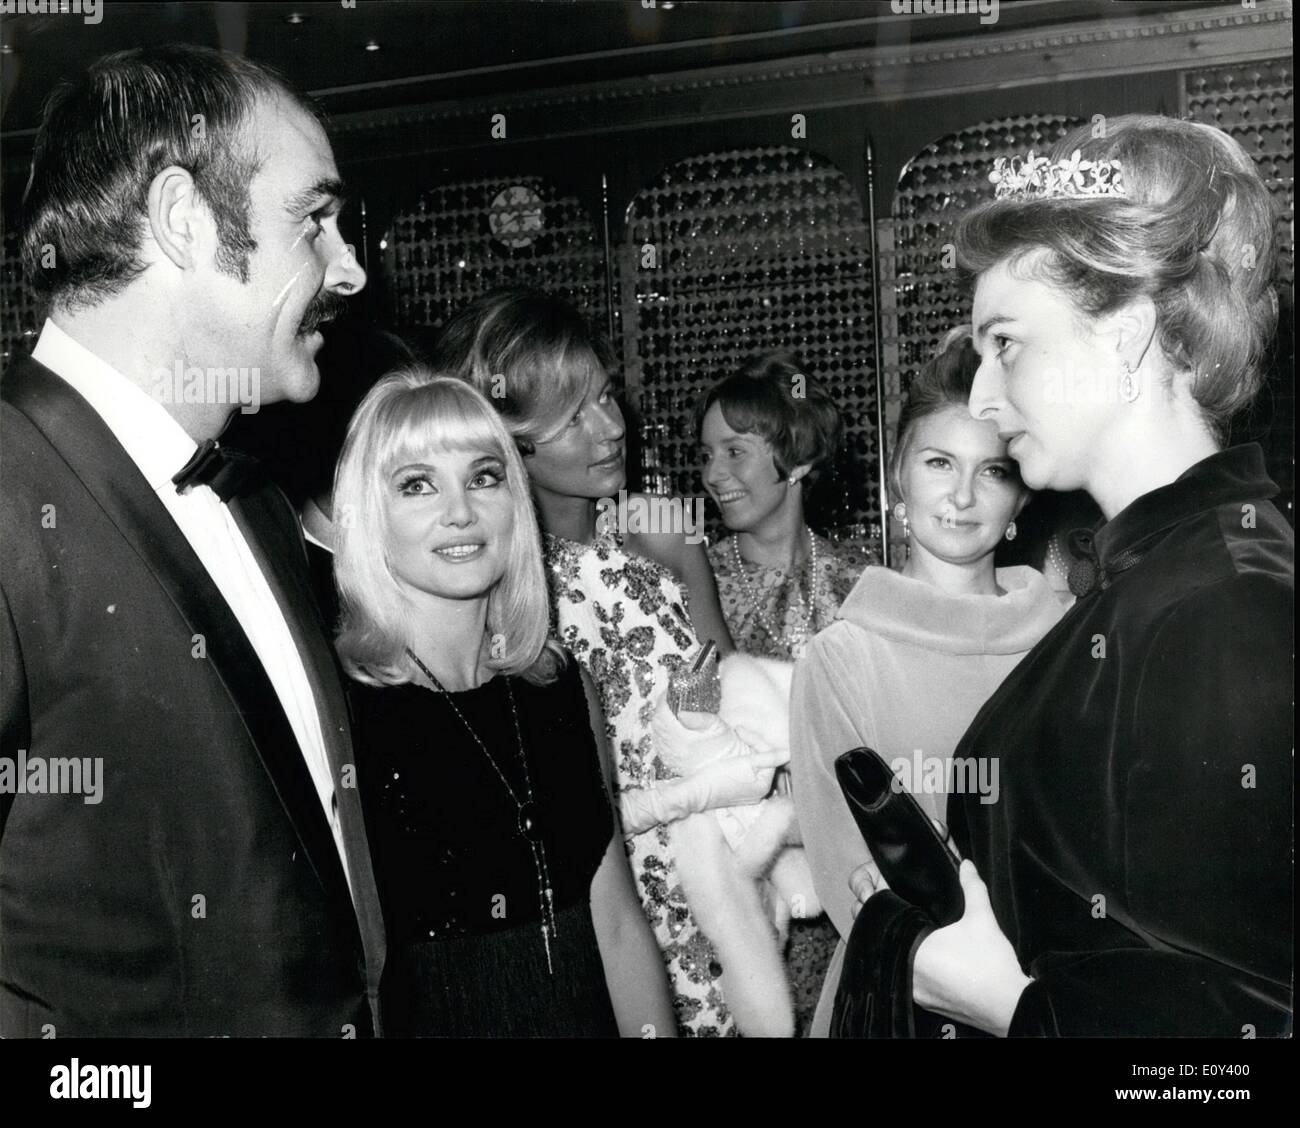 Oct. 10, 1968 - Princess Alexandra meets the ex-James Bond.: princess Alexandra is seen chatting with Sean Connery and his actress wife Diane Cilento at last night's premier of ''Mayerling'' in London. The Princess and her husband Mr Angus Ogivly also met many at the other stars in the film. Sean was the former James Bond. Stock Photo